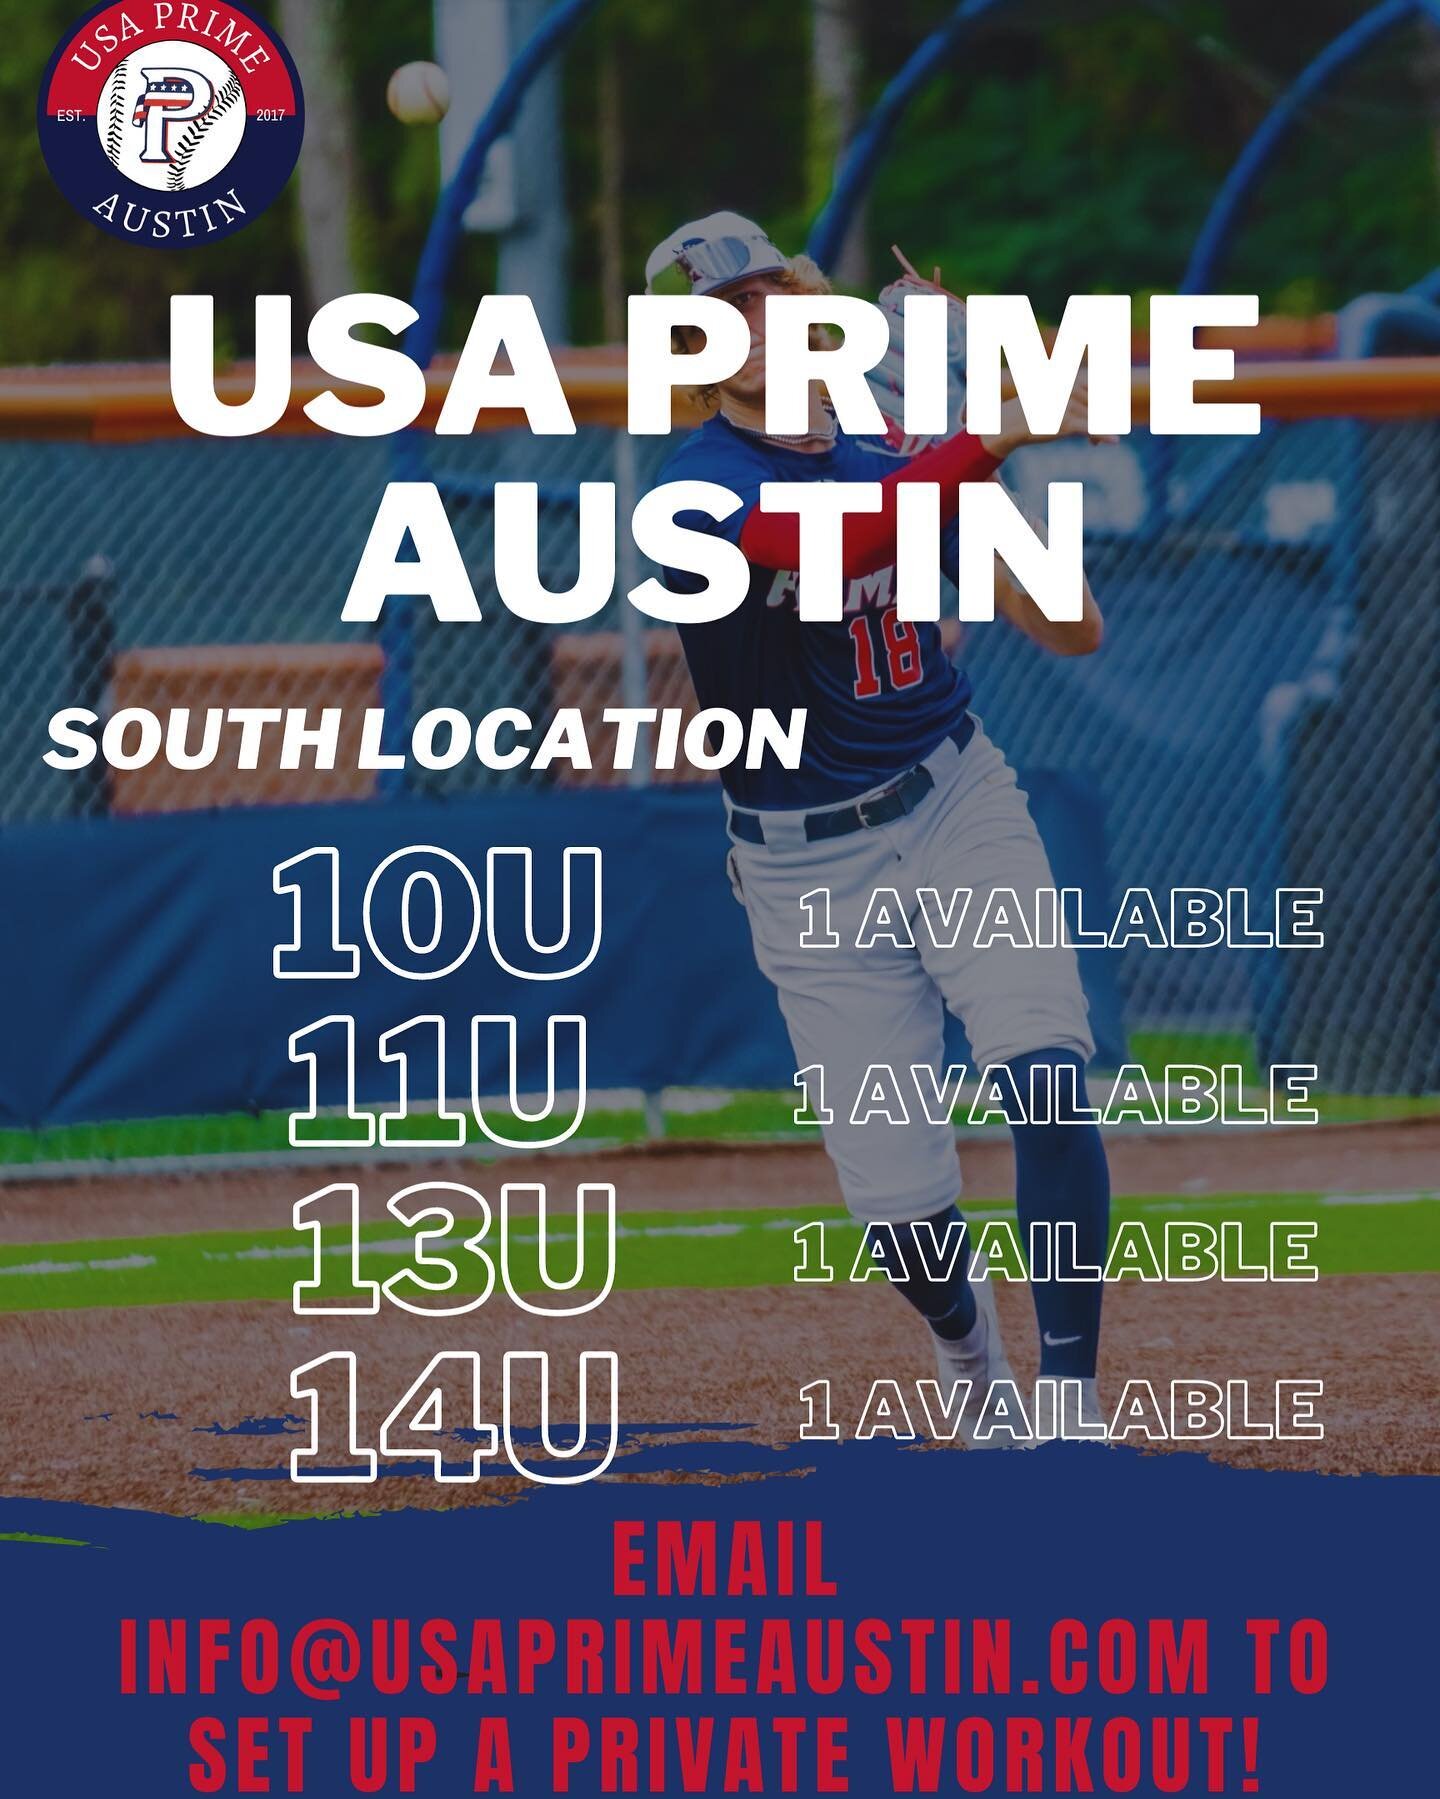 We have limited availability on our Spring Rosters! If you are interested in joining the #PrimeMovement, email us to set up a private workout‼️
.
#usaprimebaseball #usaprimeaustin #primestuds